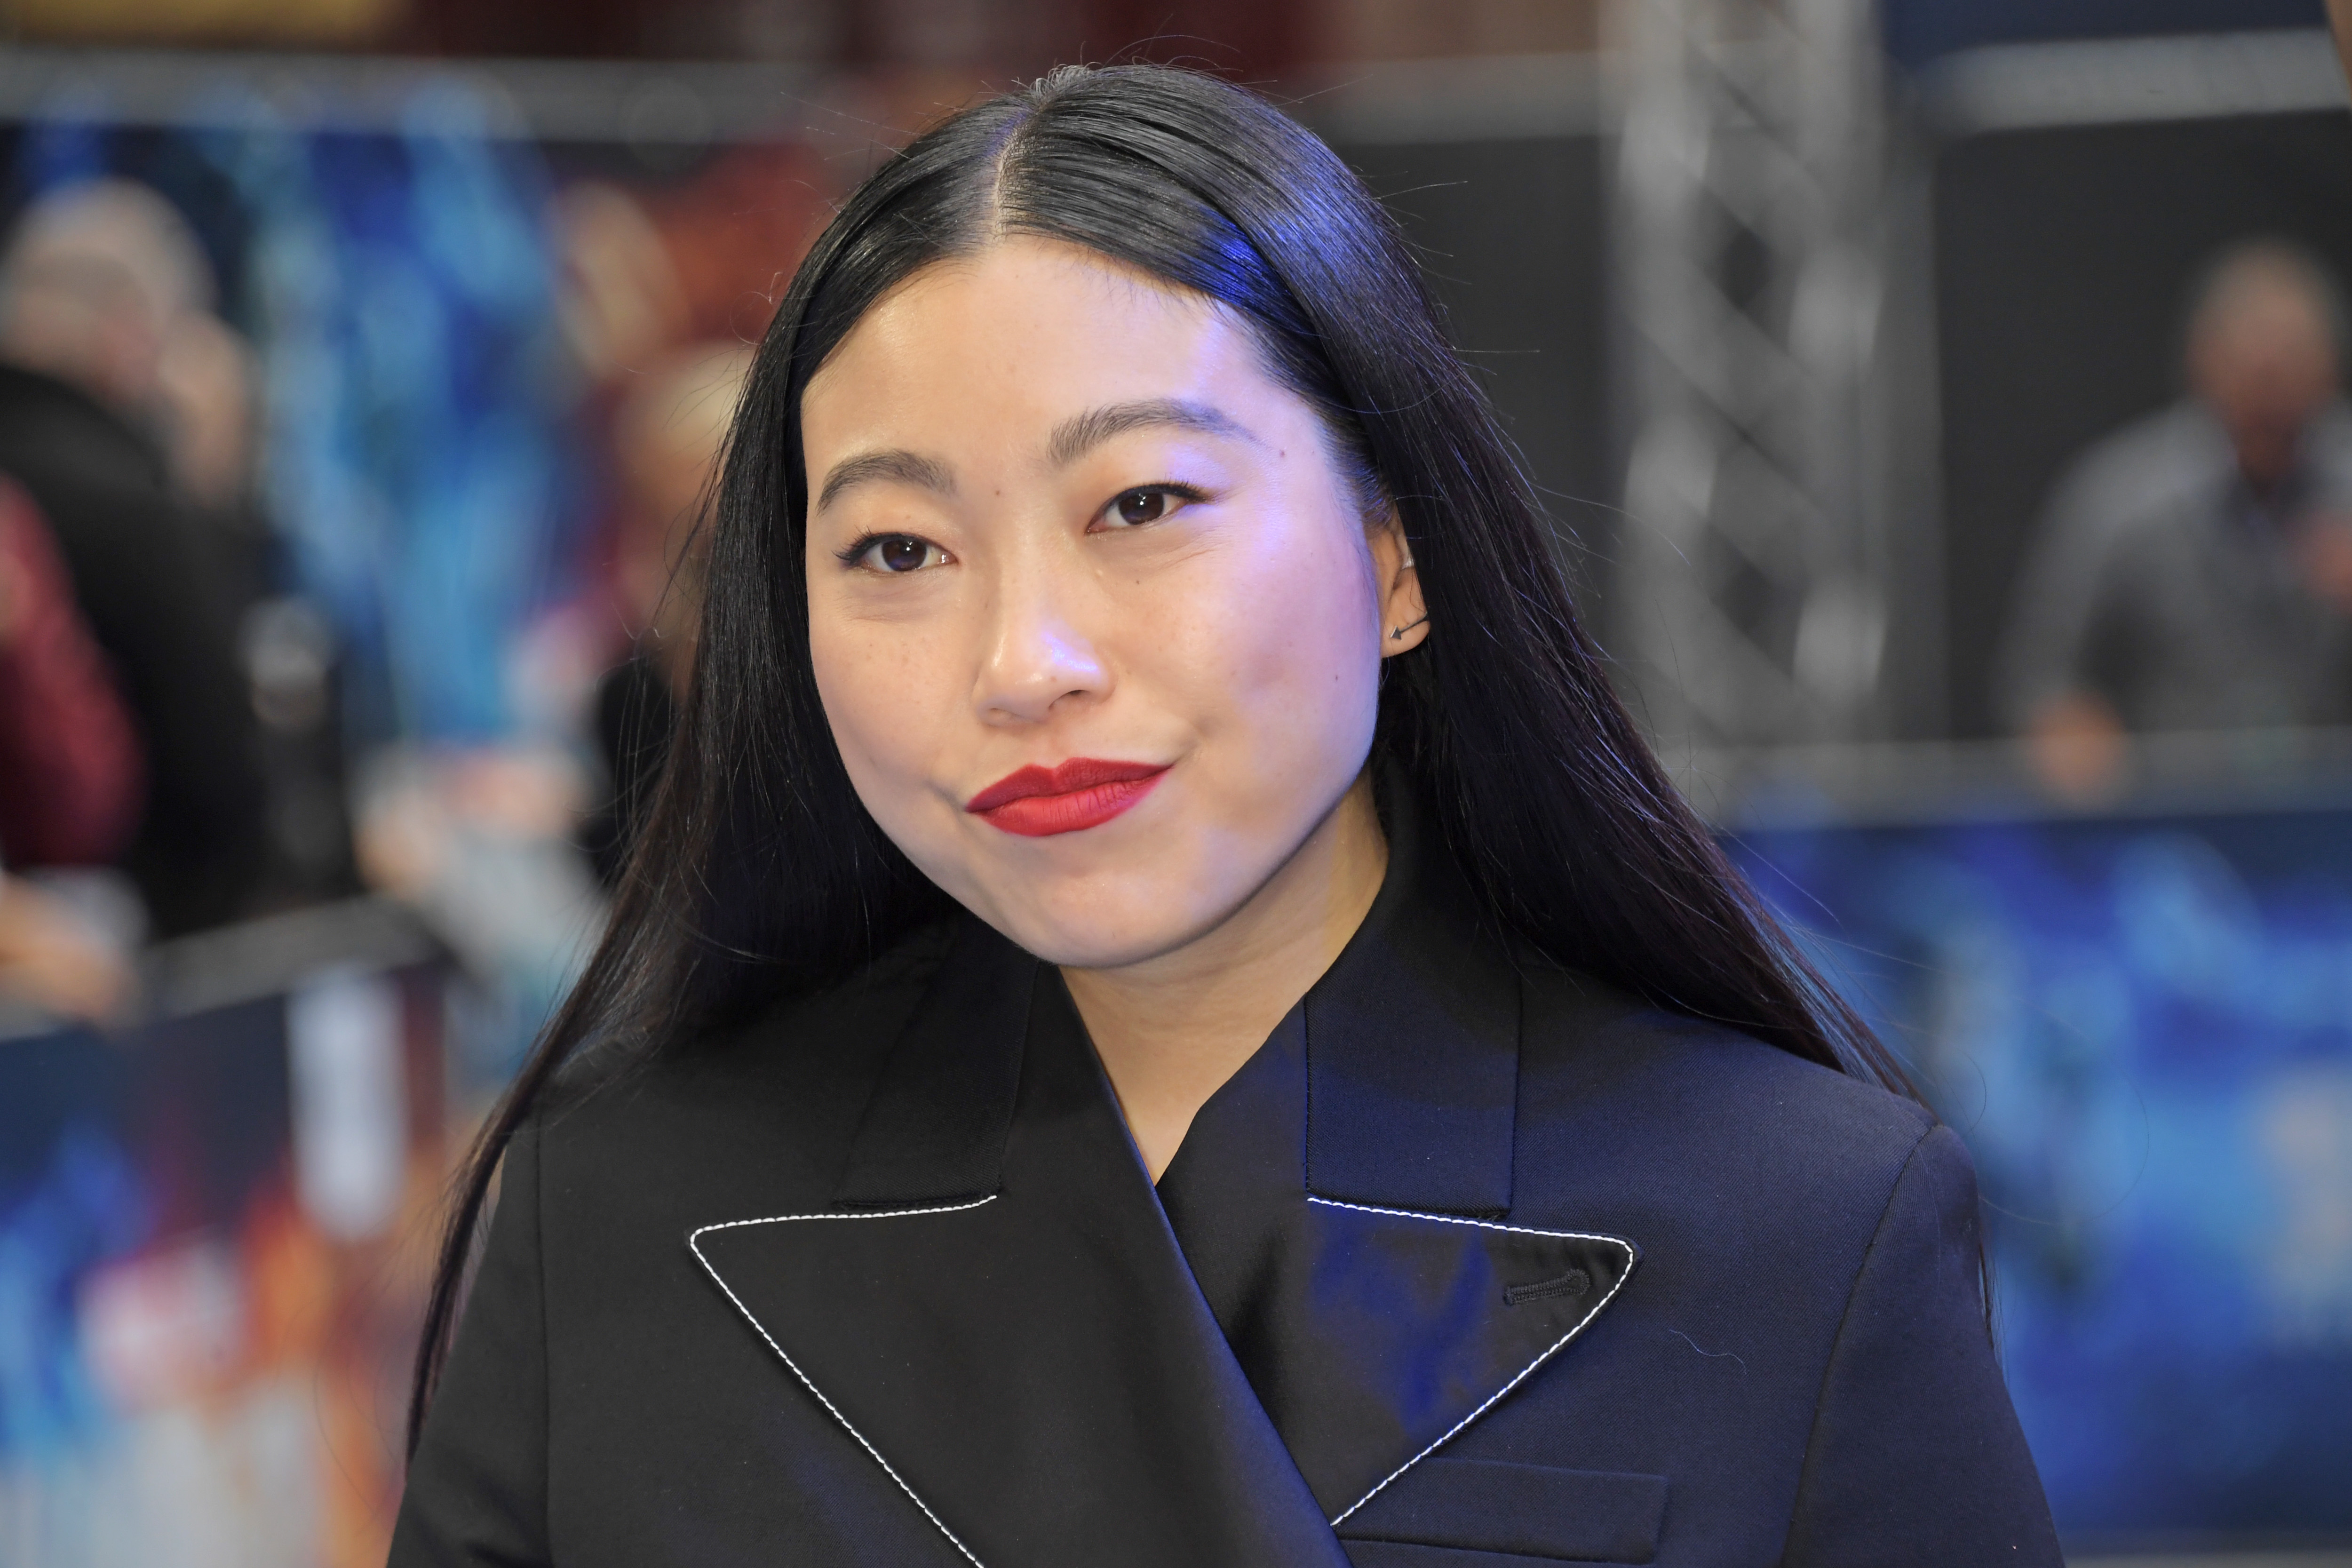 Awkwafina smiling at premiere of Shang-Chi and the Legend of the Ten Rings